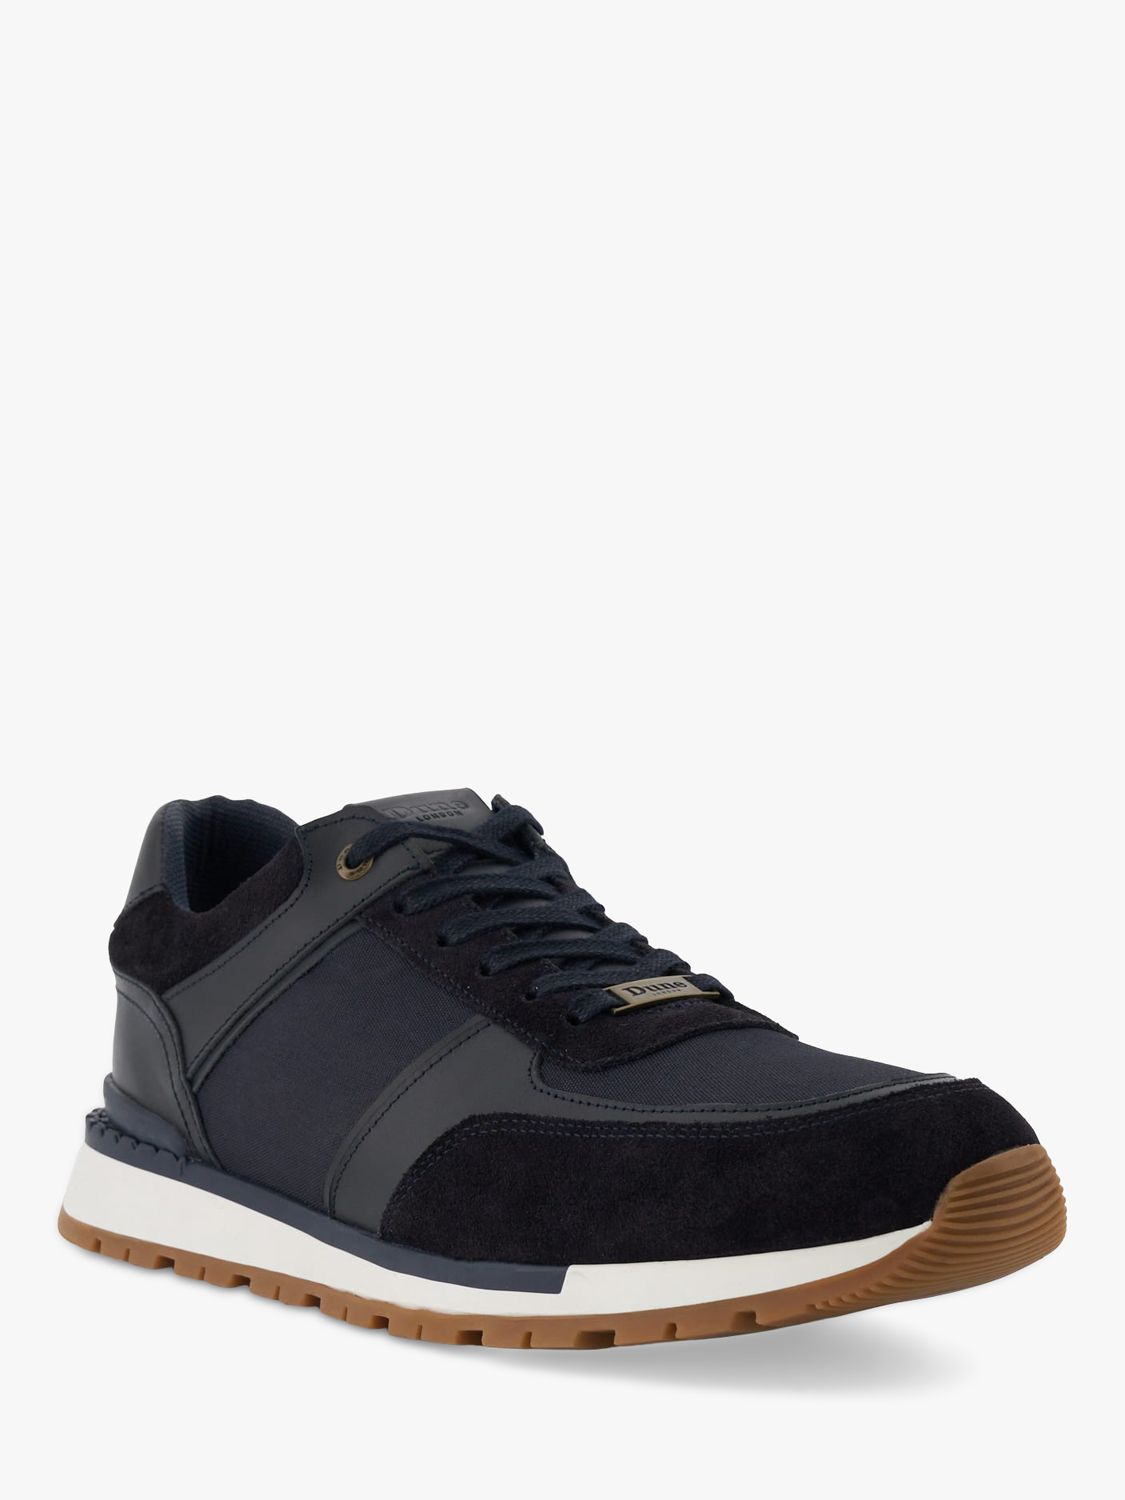 Dune Titles Suede and Leather Trainers, Navy at John Lewis & Partners